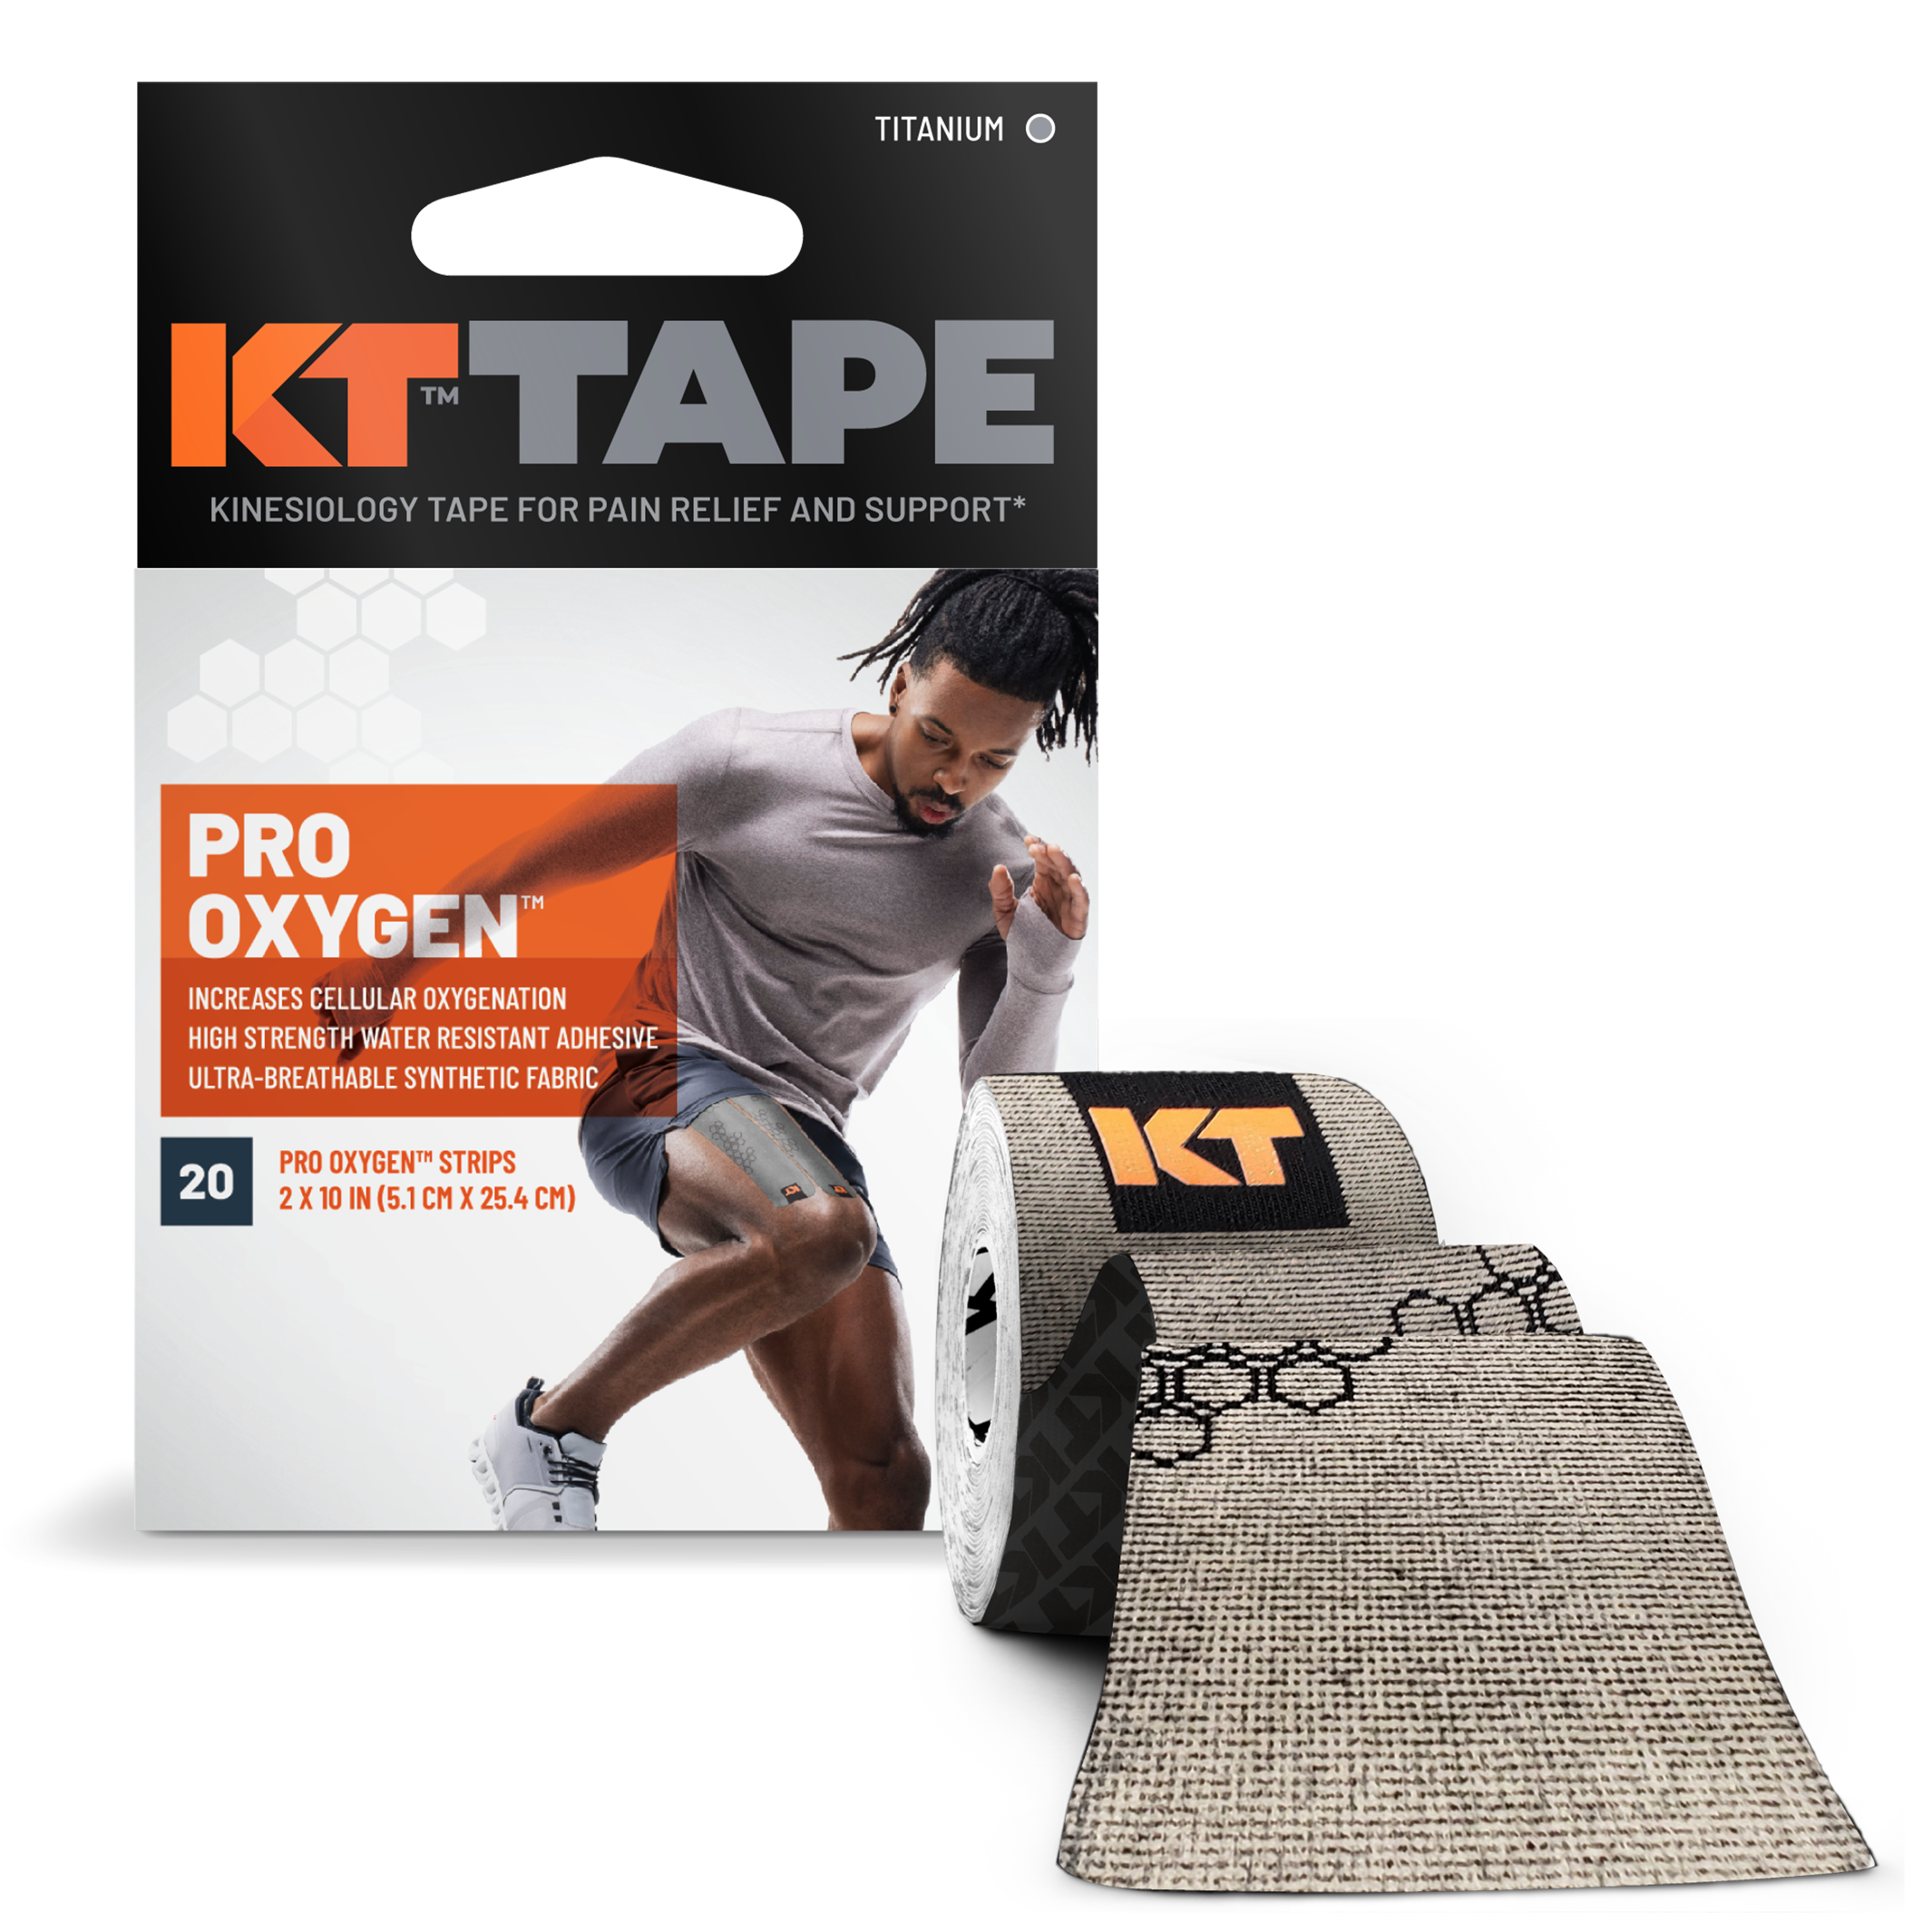 5 Essential Criteria For Choosing An Athletic Tape For Knee Injuries •  DynaPro Health Inc.